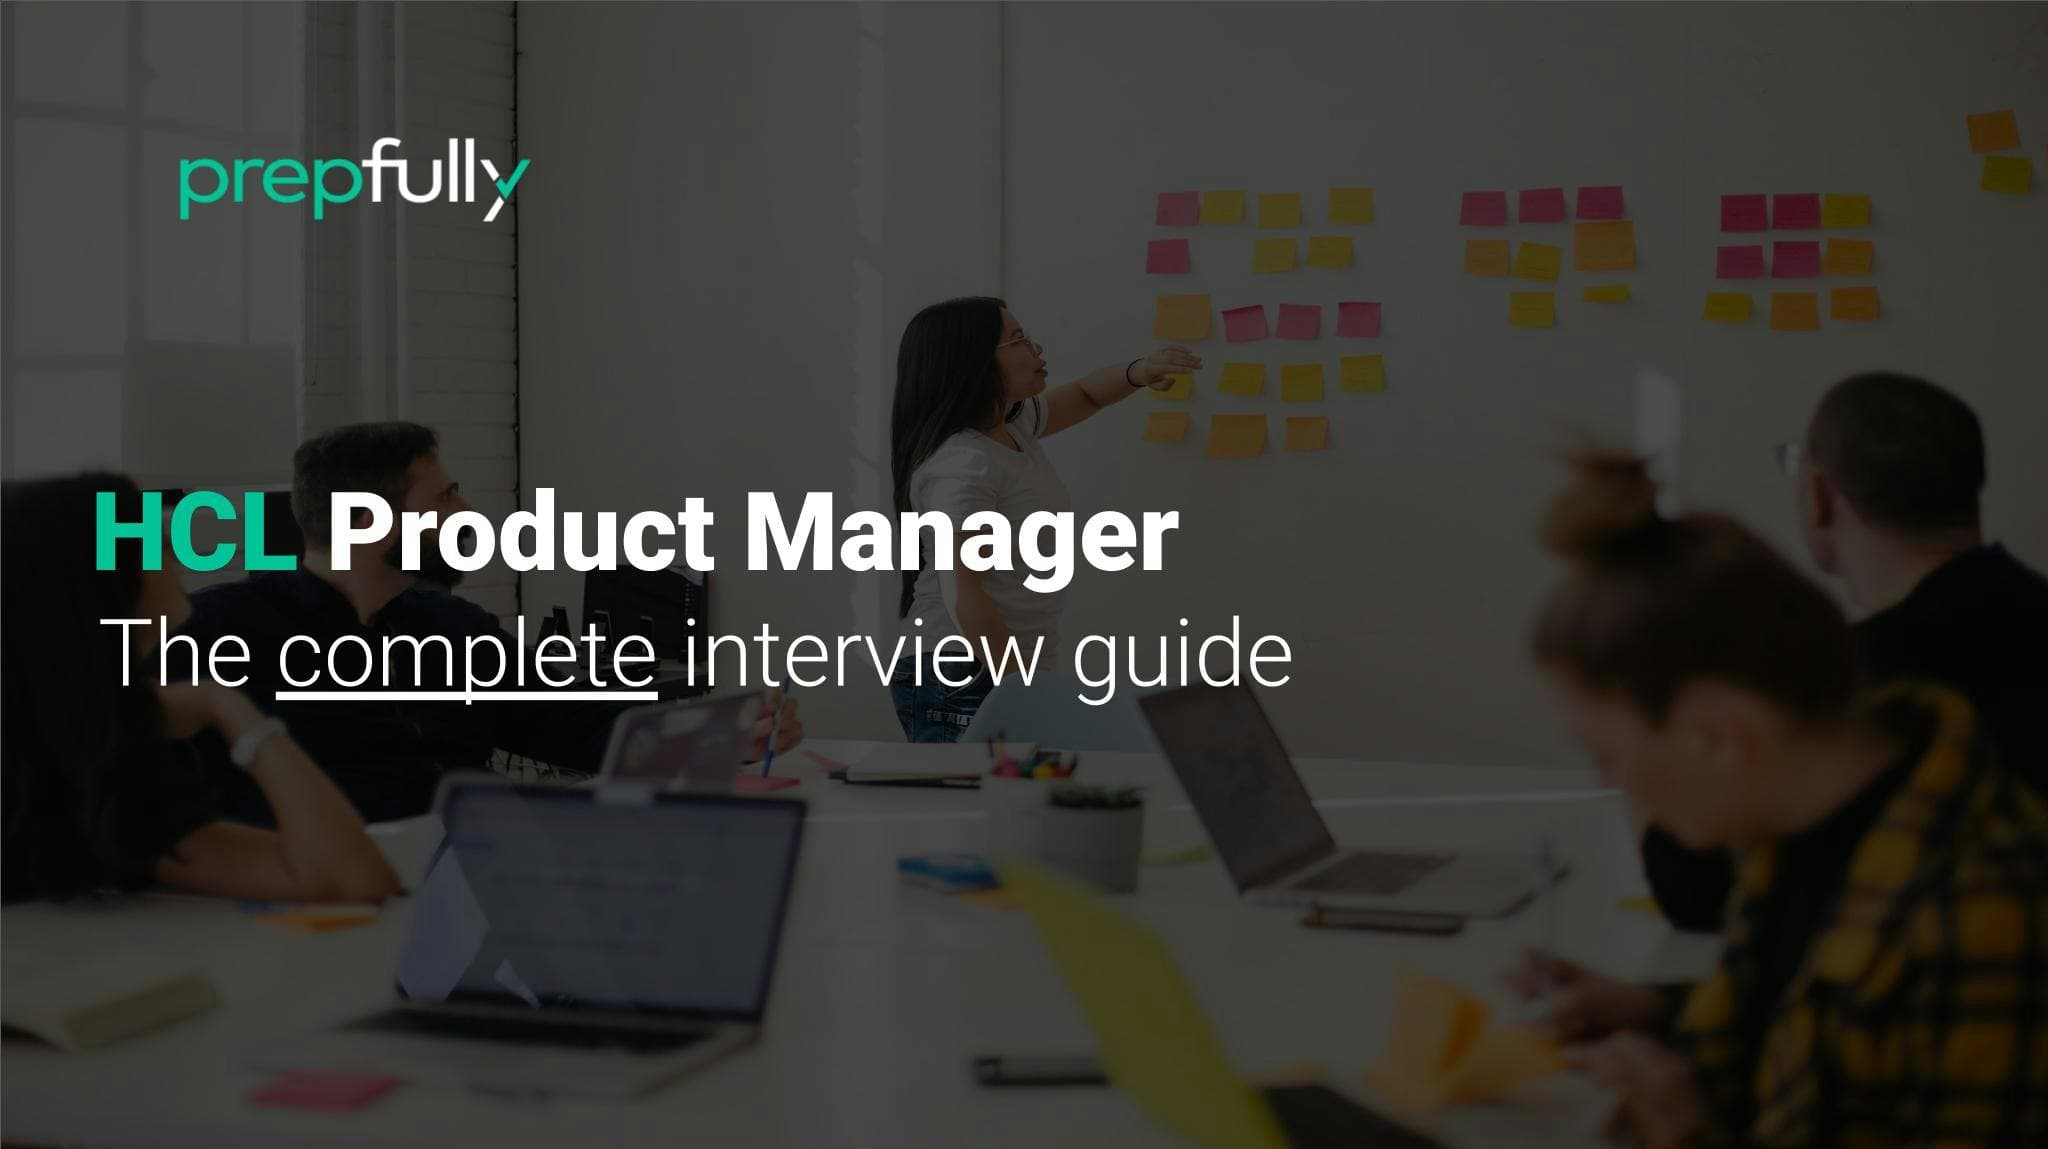 Interview guide for HCL Product Manager